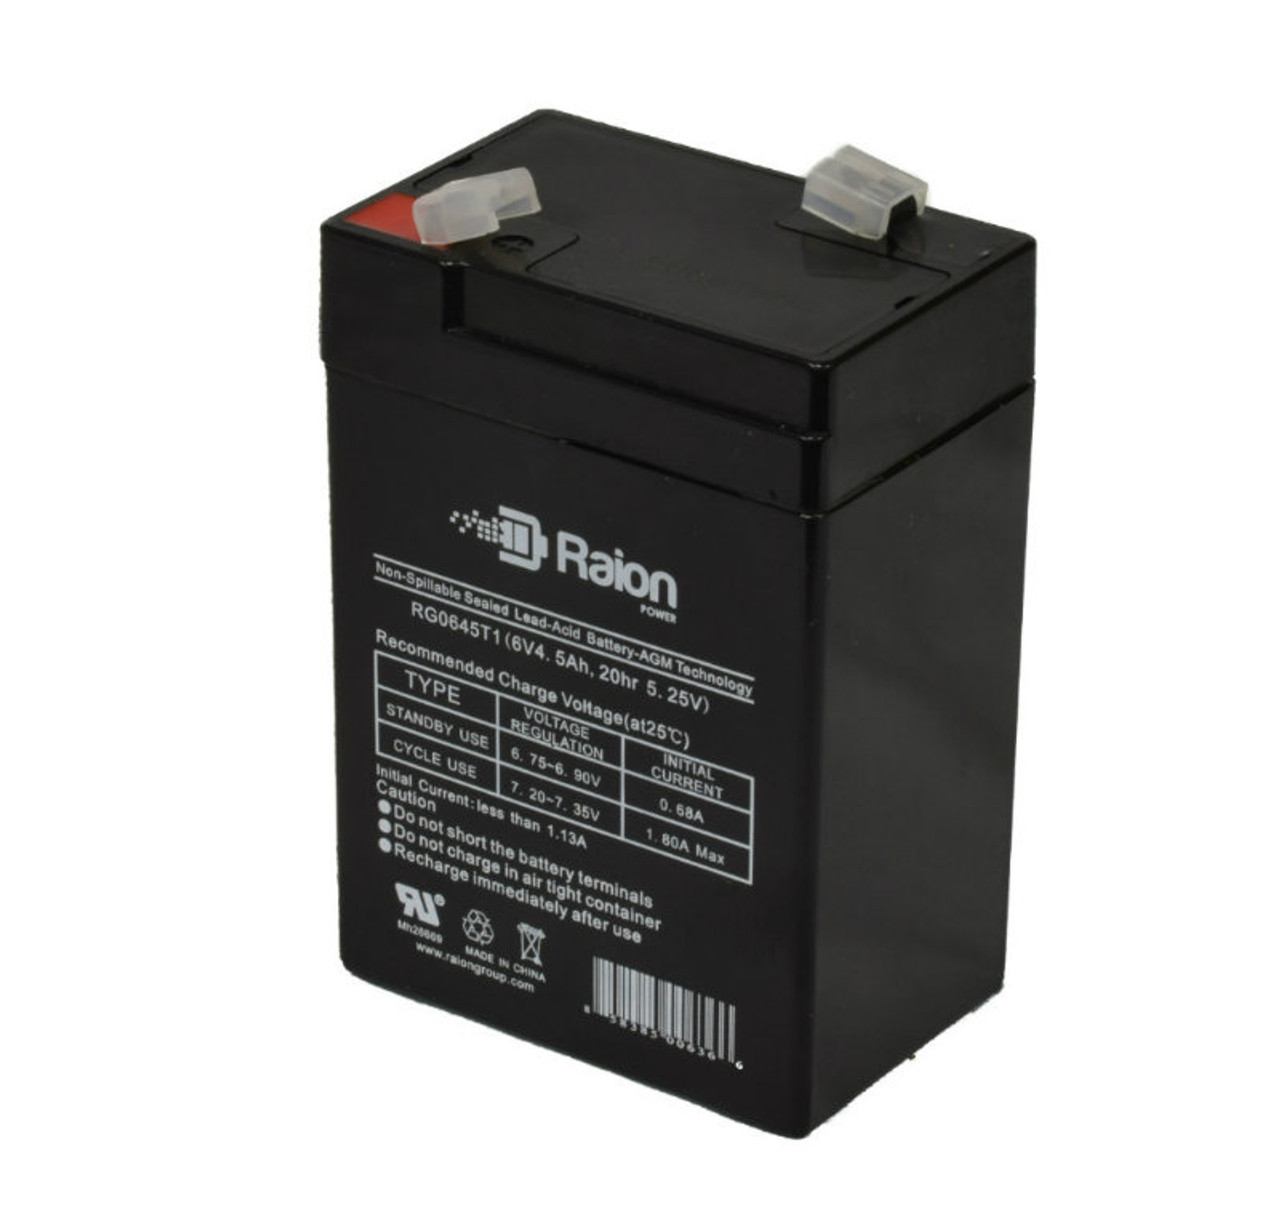 Raion Power RG0645T1 6V 4.5Ah Replacement Battery Cartridge for Mule 6GC012E